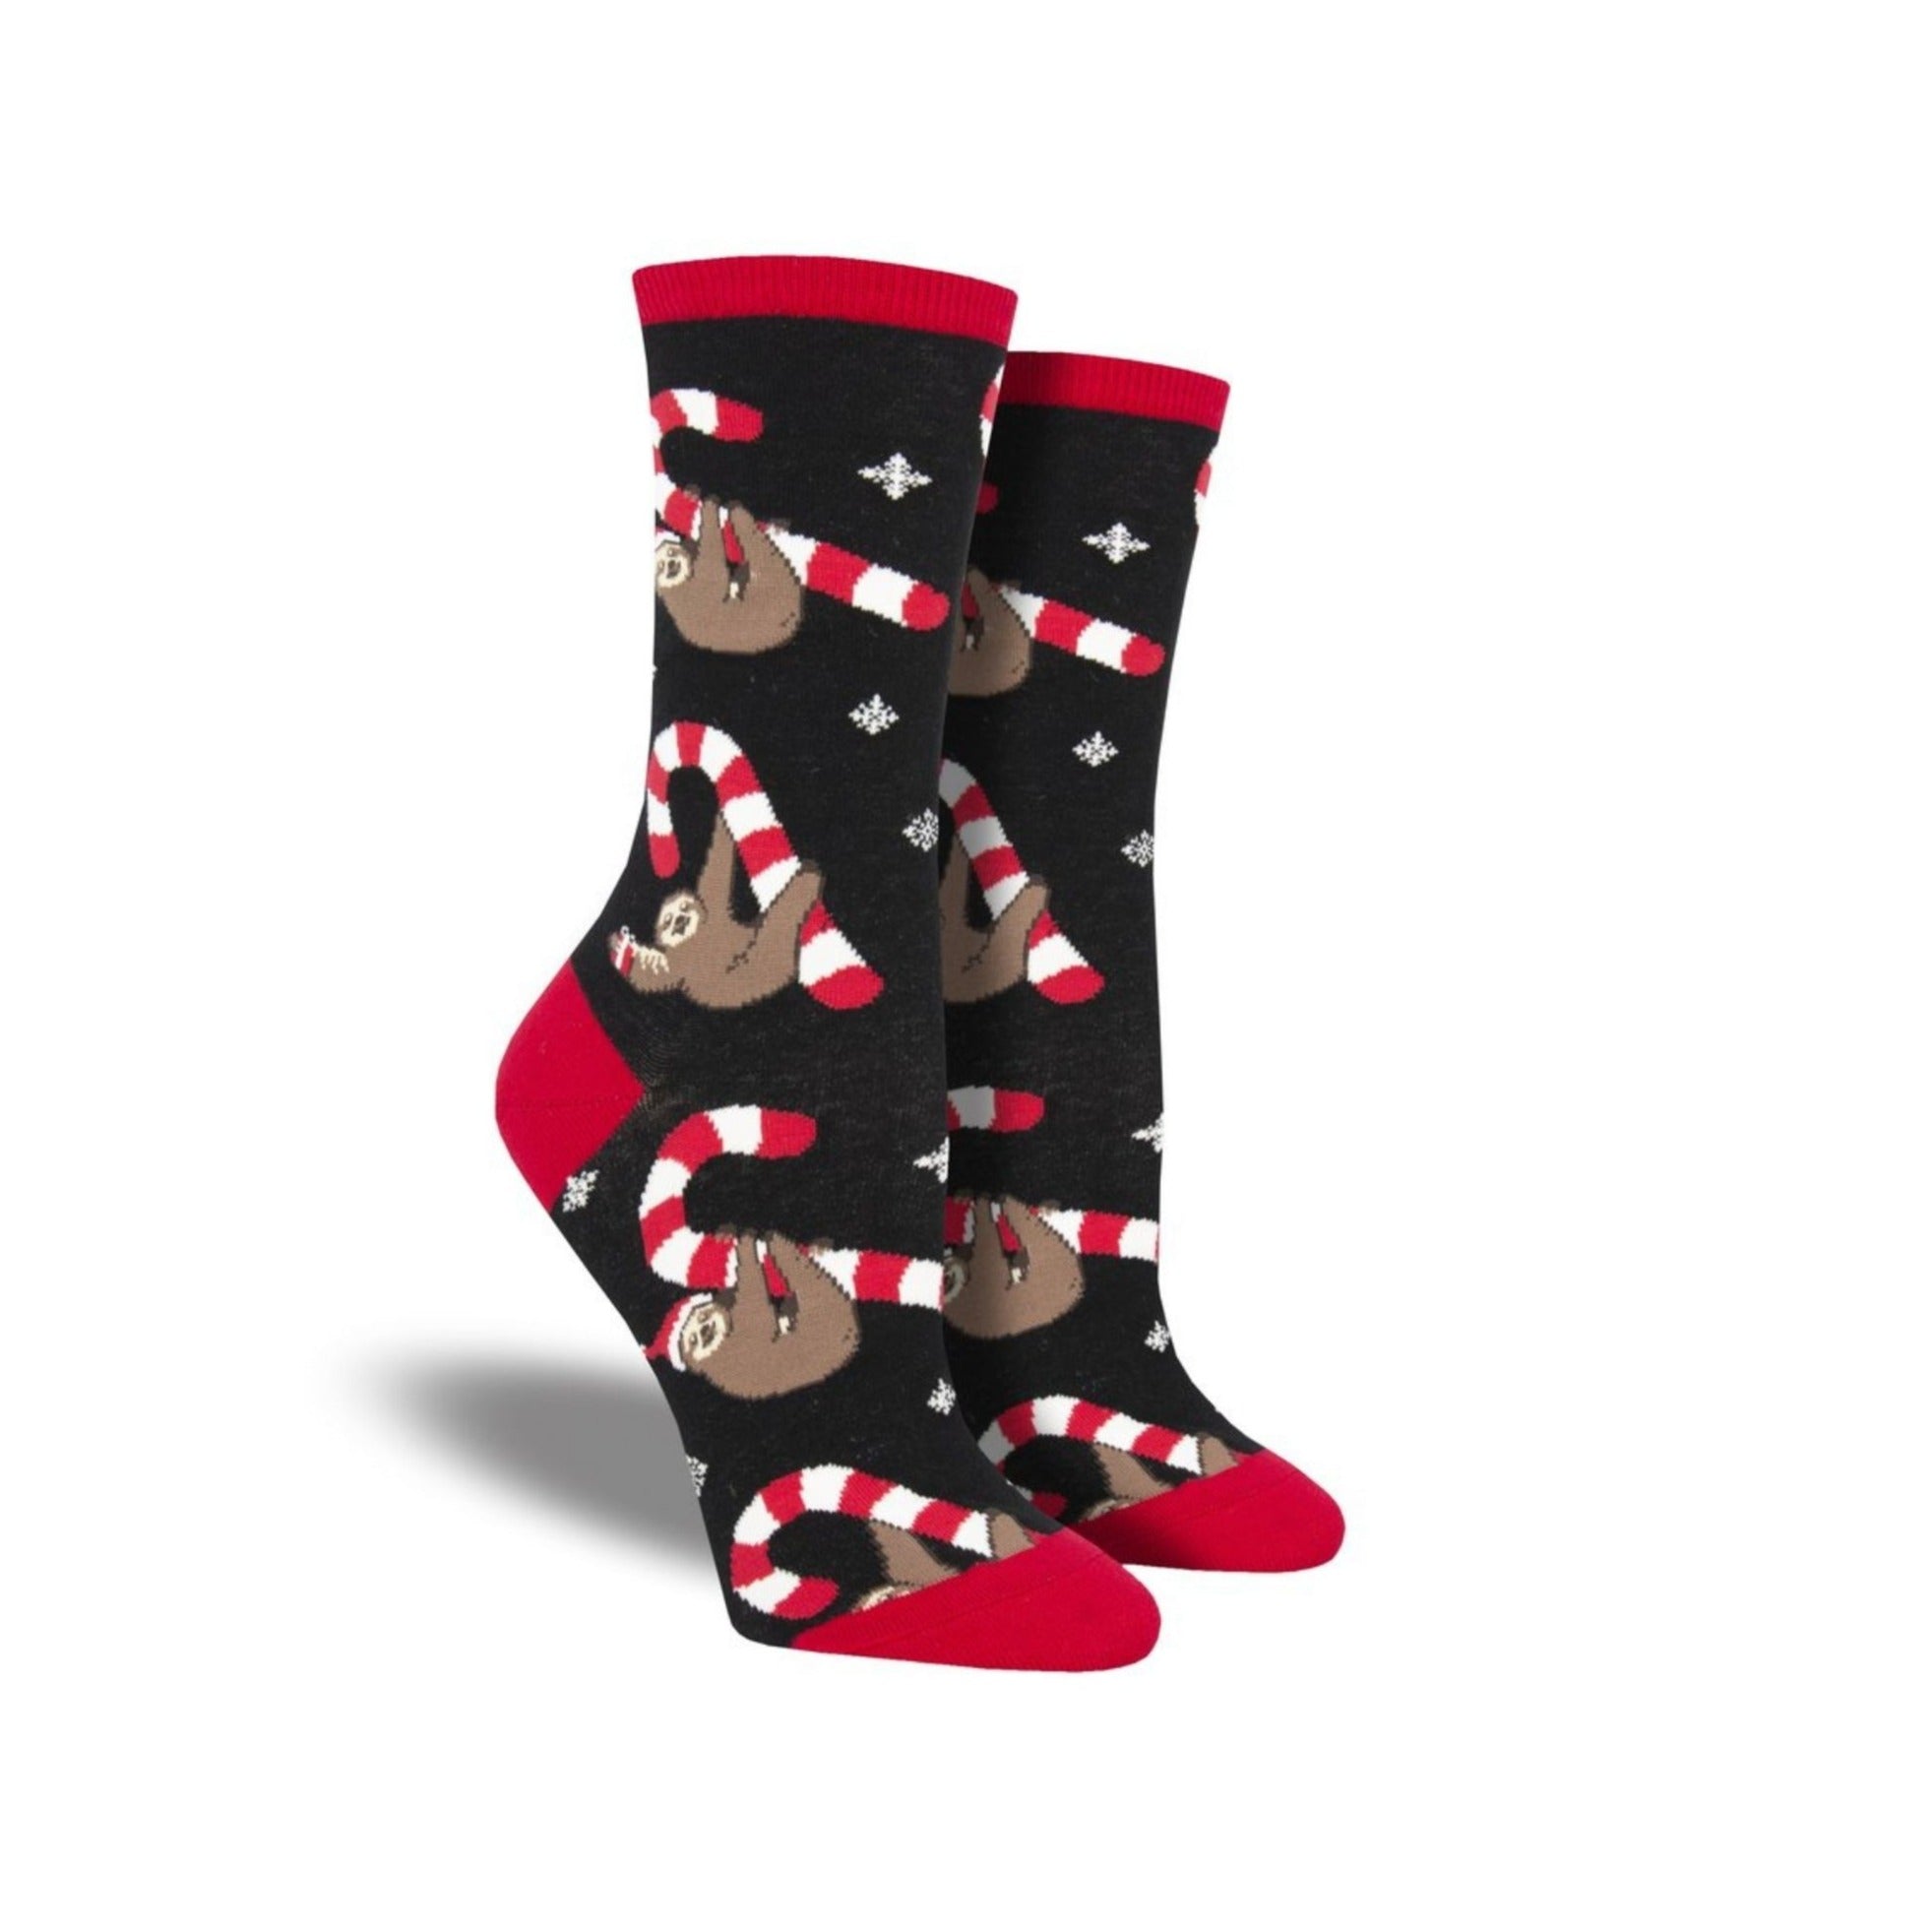 Black socks with red accents featuring sloths hanging from candy canes